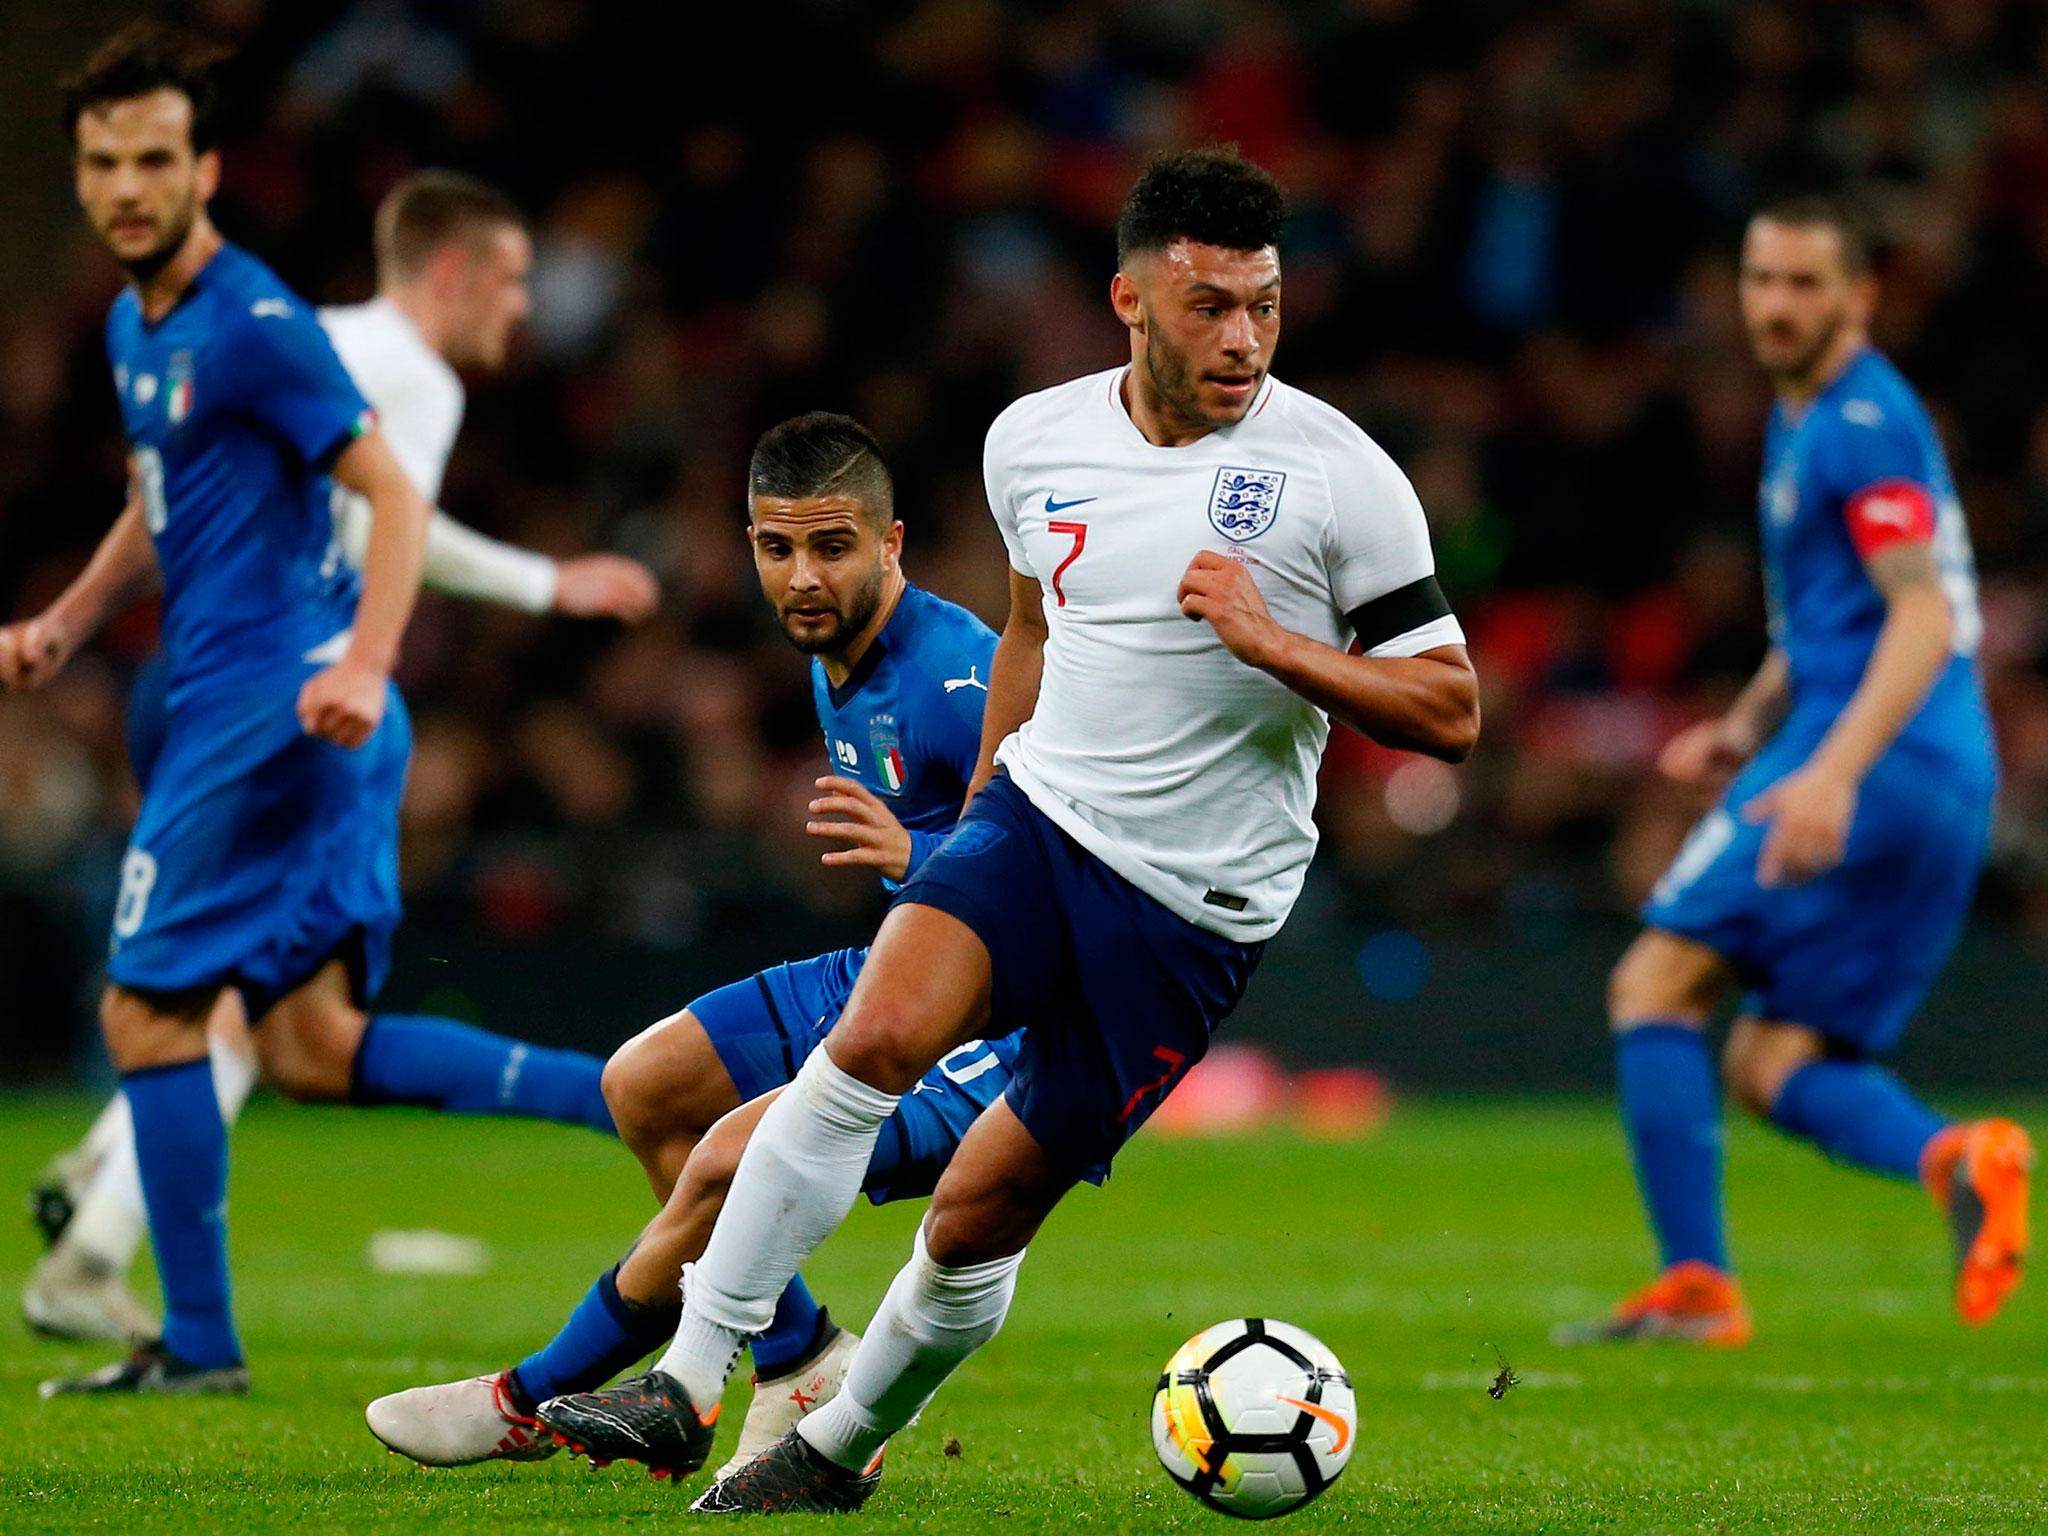 Alex Oxlade-Chamberlain is back in the England team and suddenly looking like a likely starter against Tunisia on 18 June